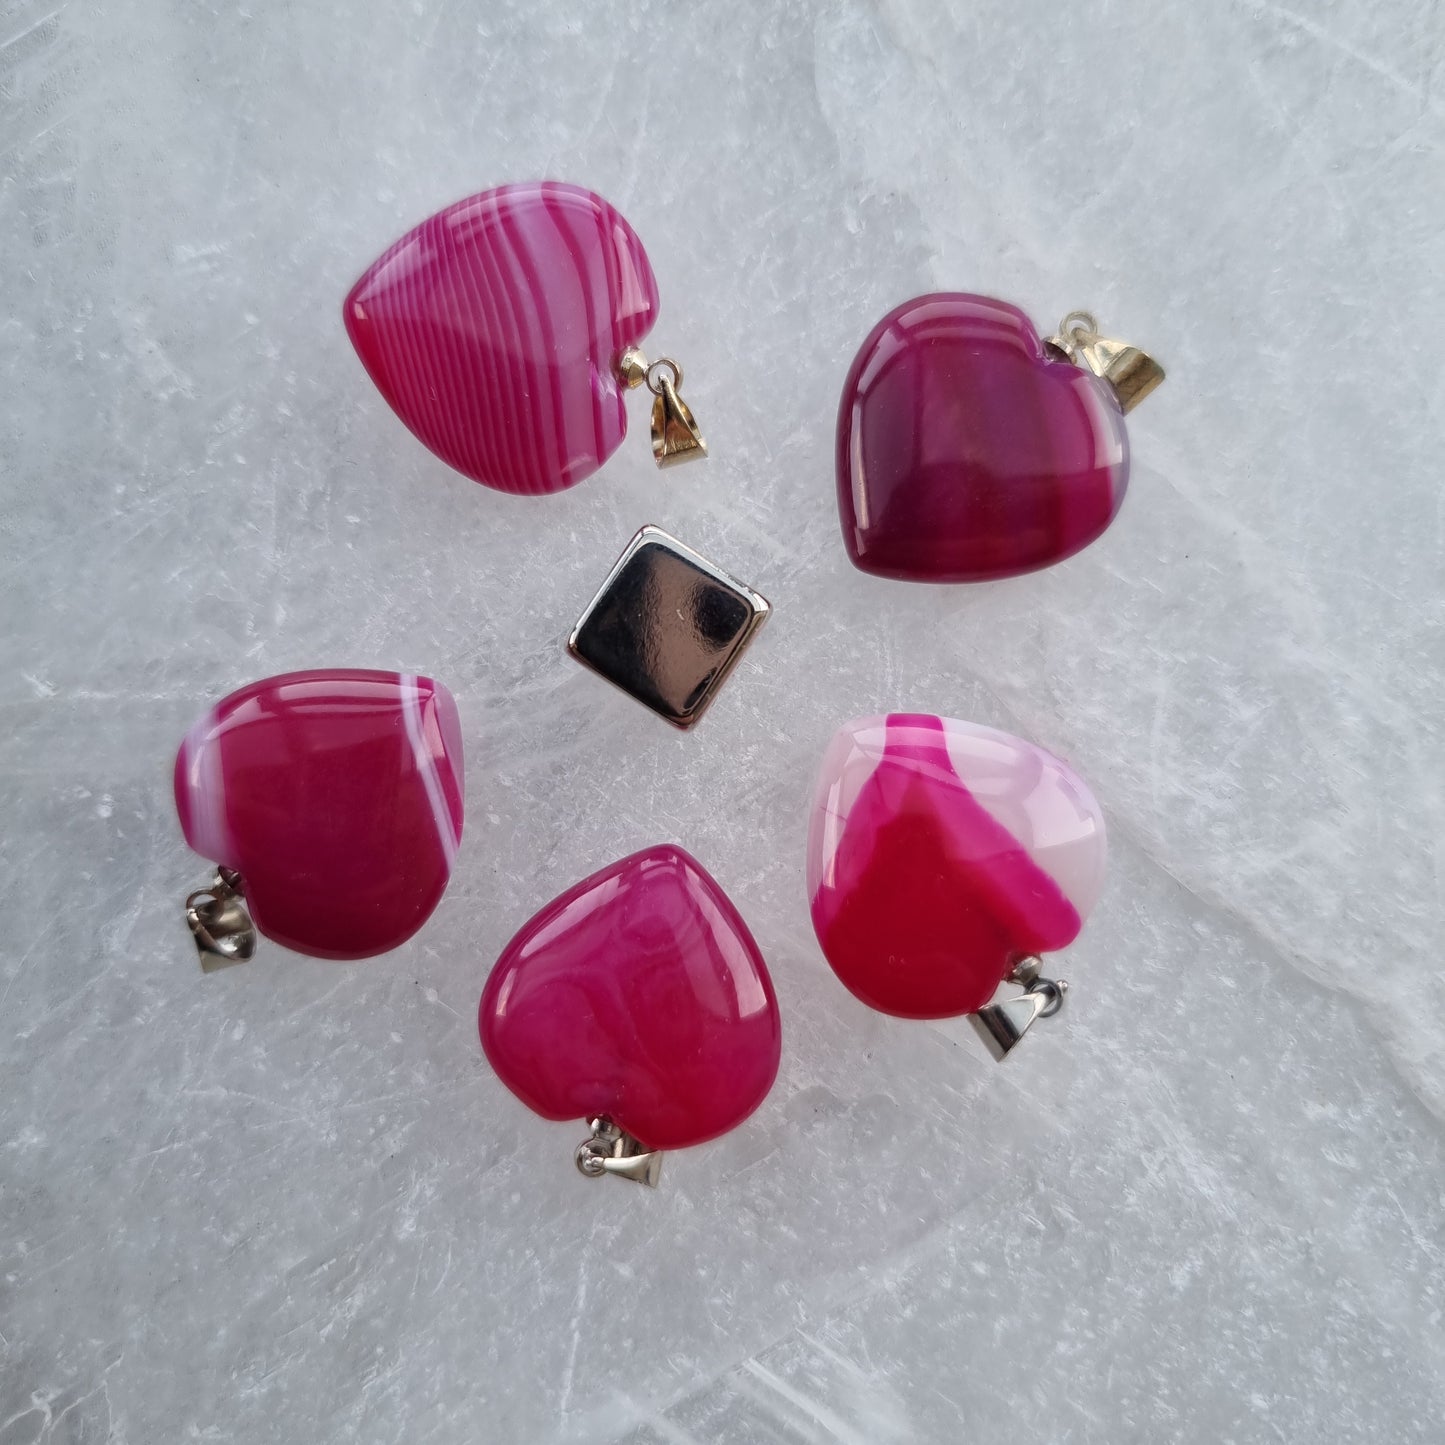 Agate Pink Pendant